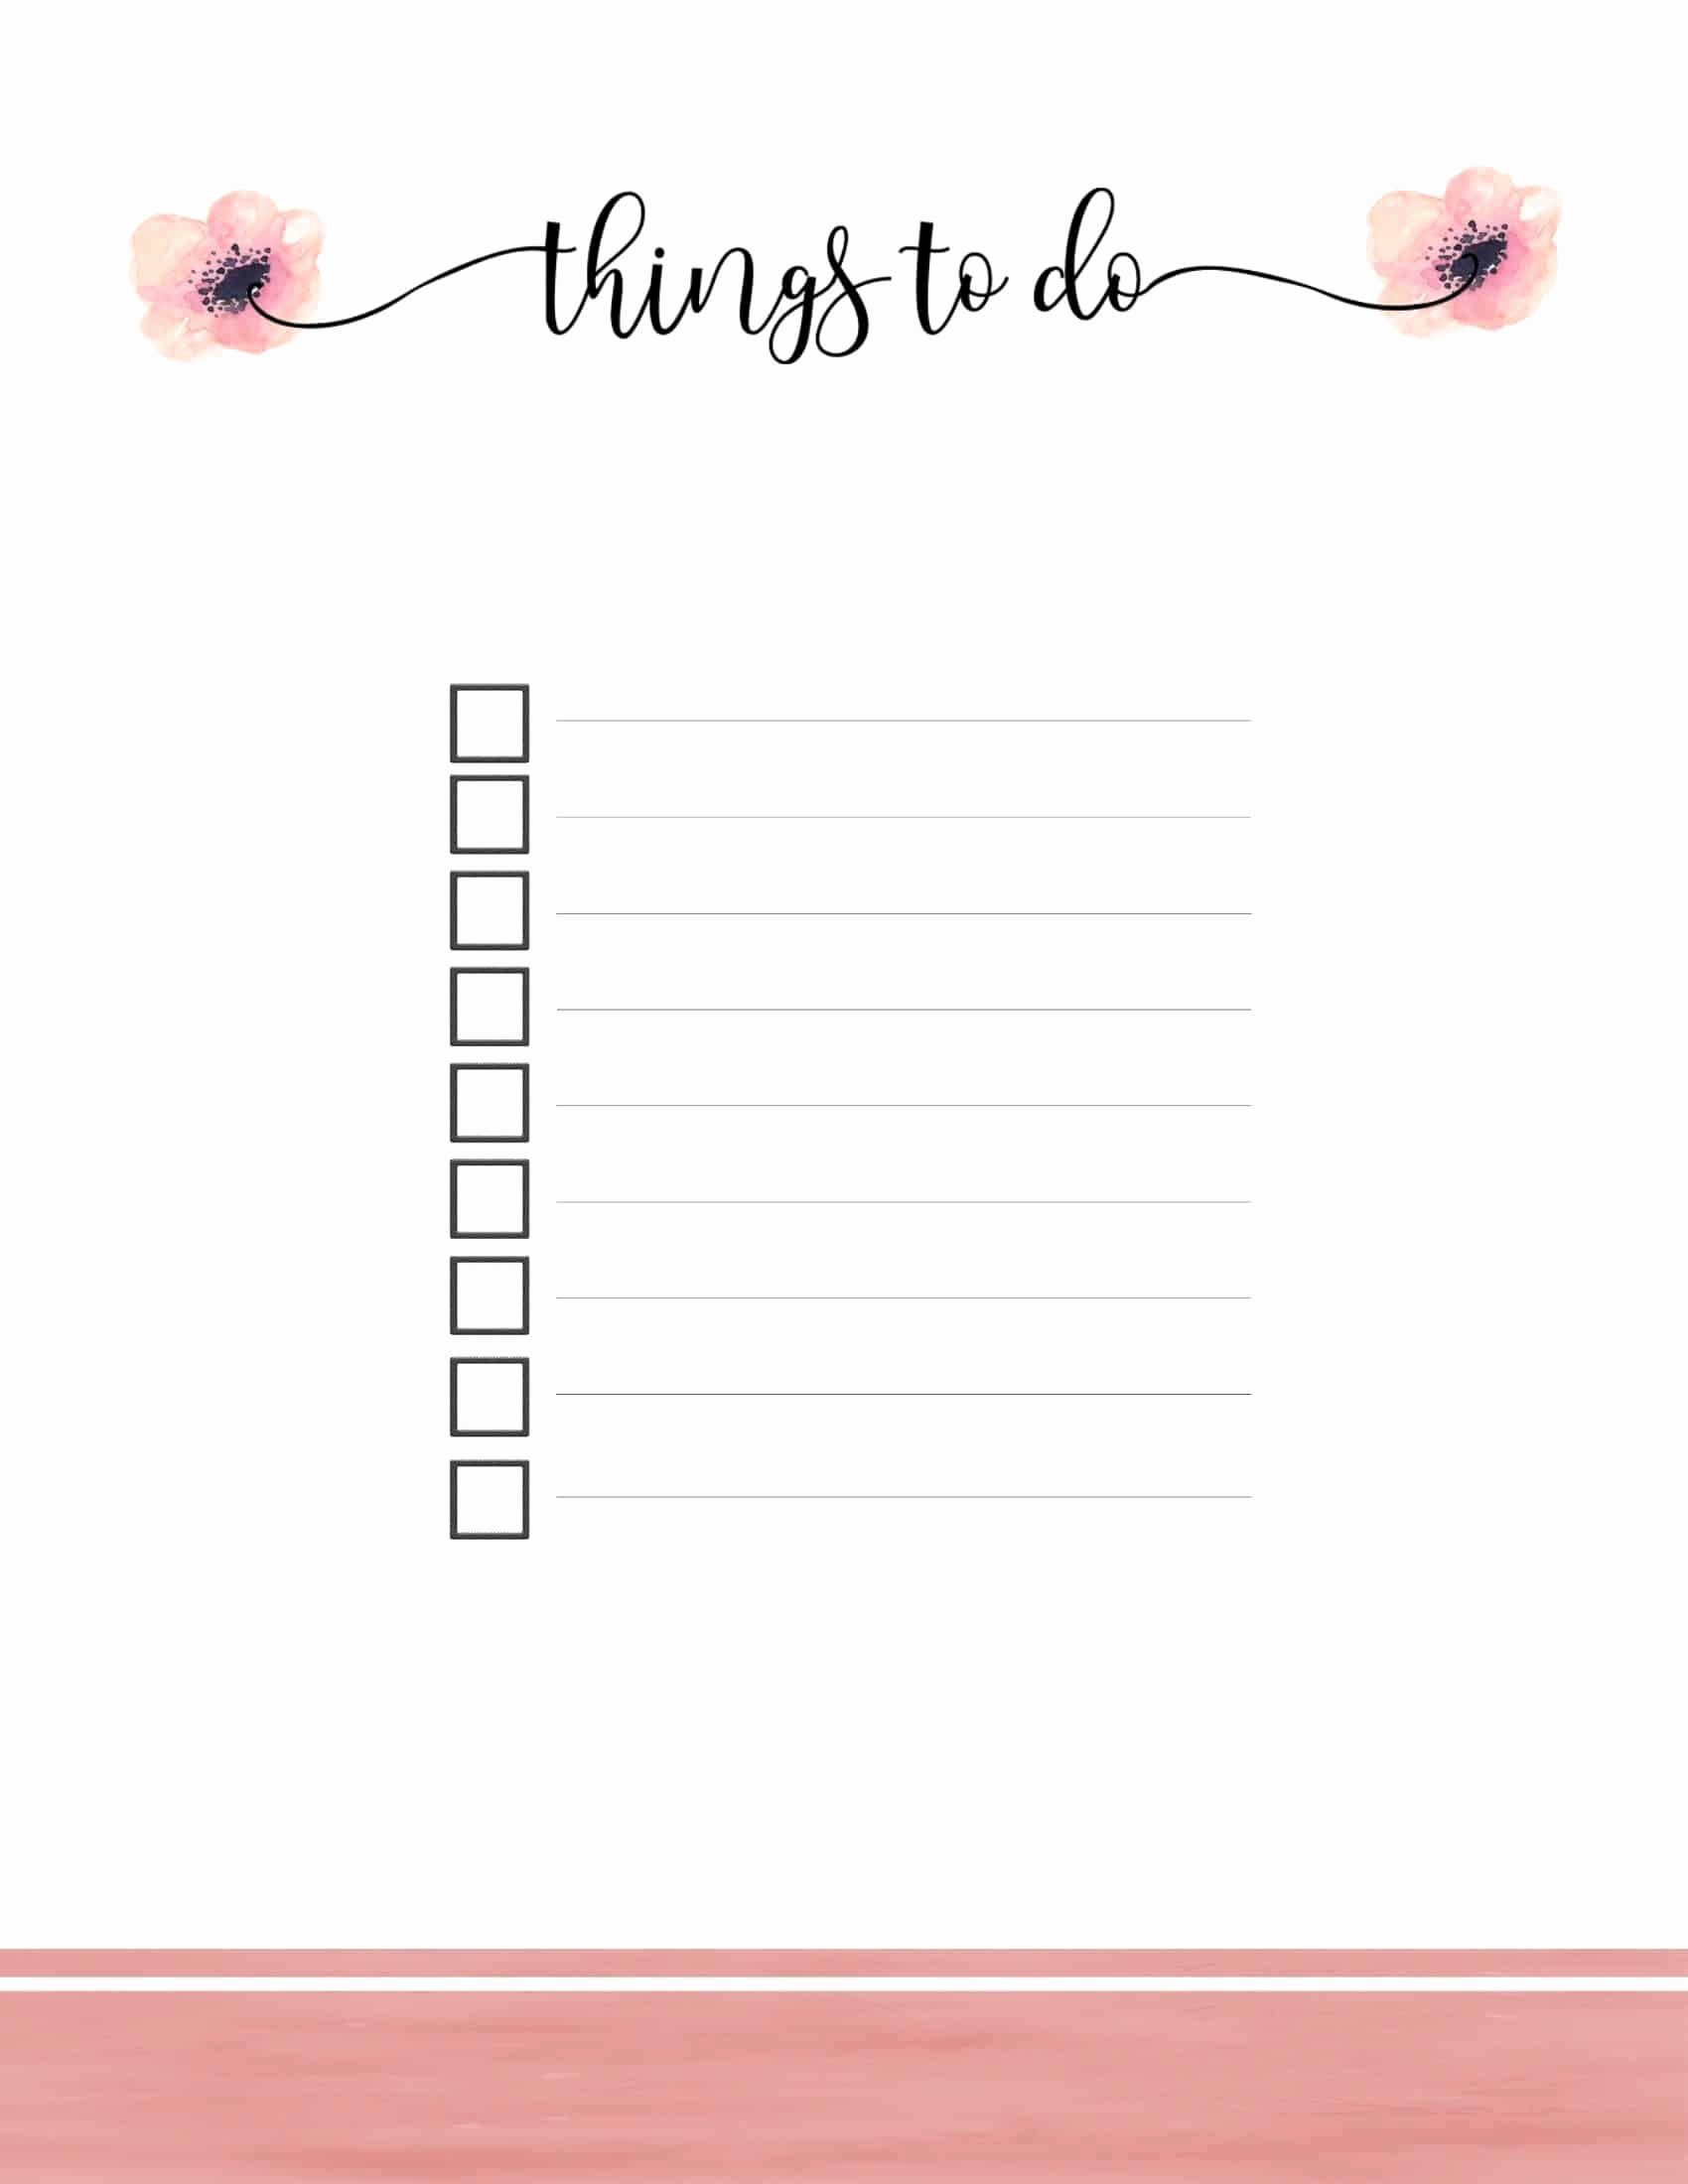 To Do List Templates Unique Free Printable to Do List Print or Use Line